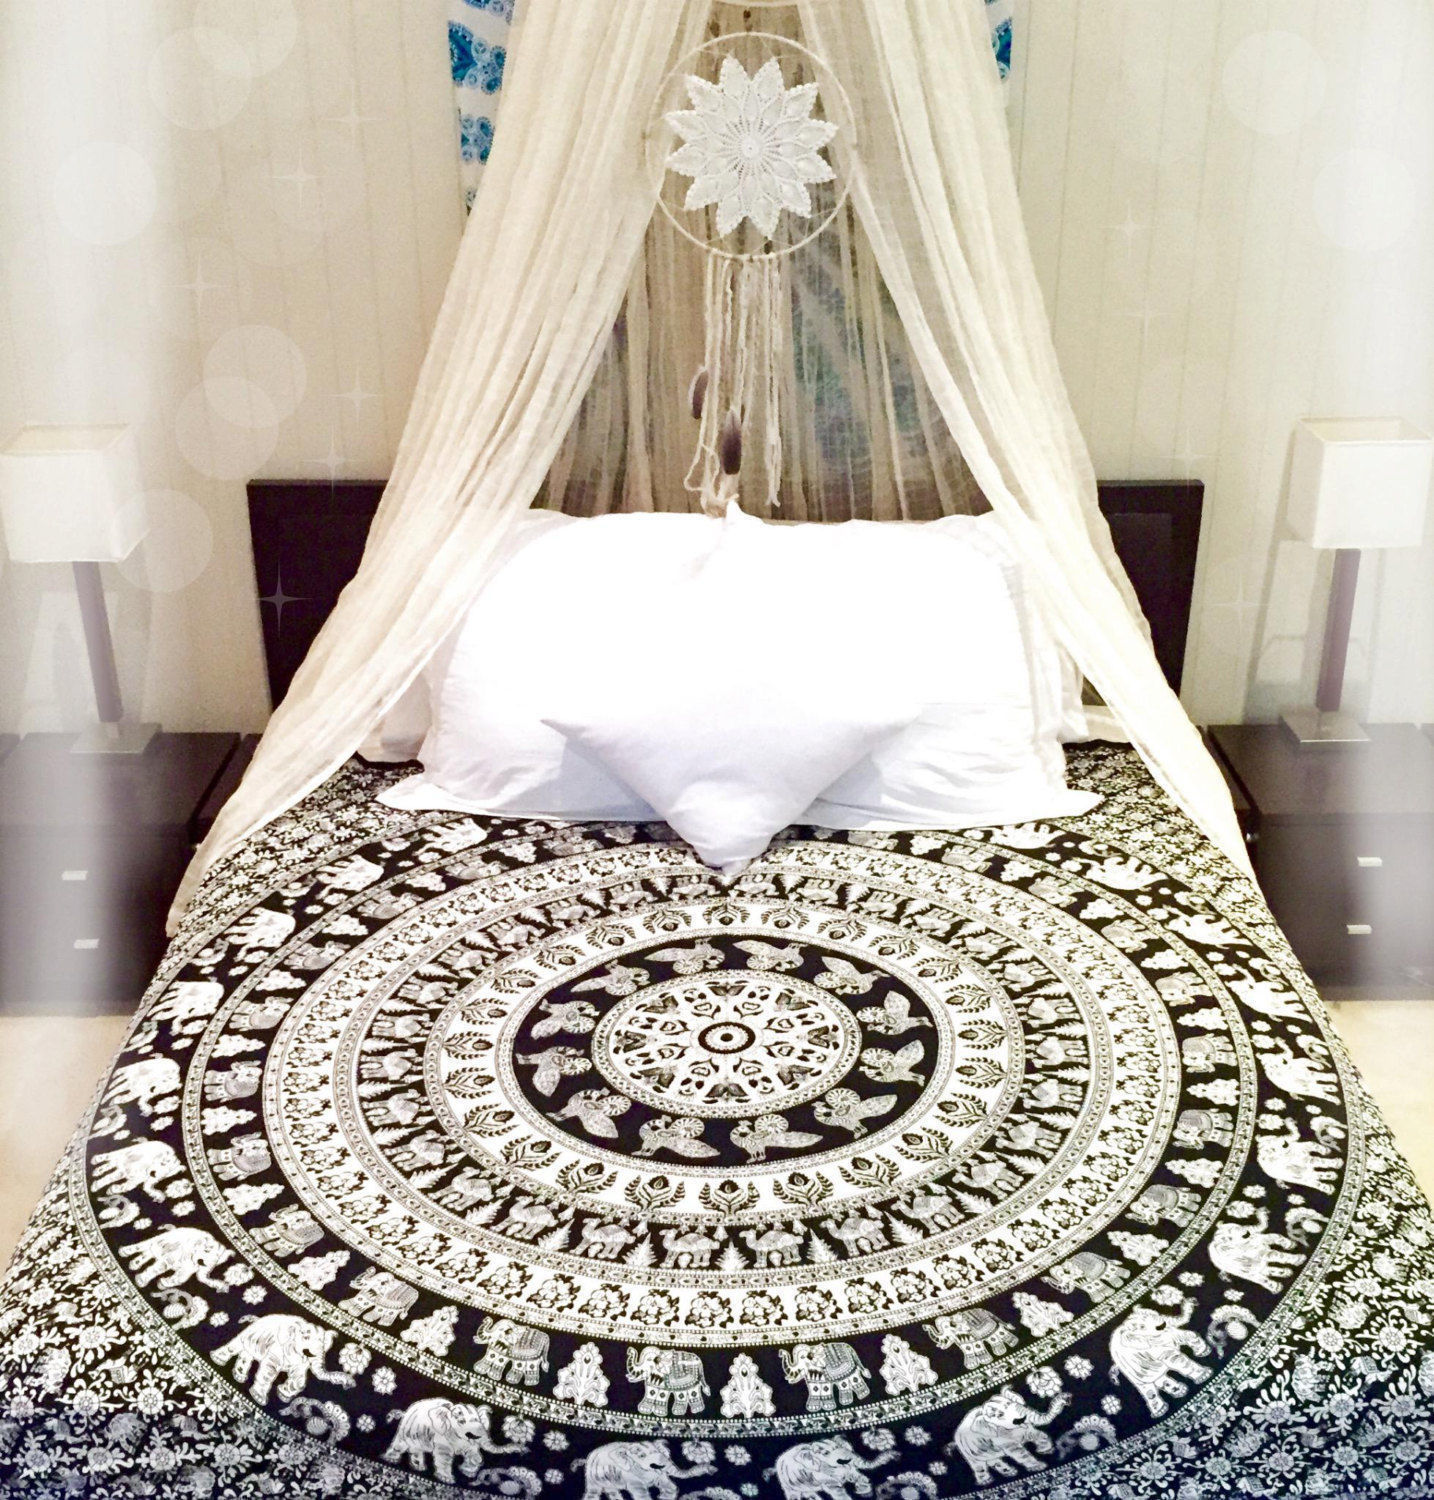 QUEEN Indian Elephant Mandala Wall Hanging Bedspread Tapestry Hippie Boho Throw 